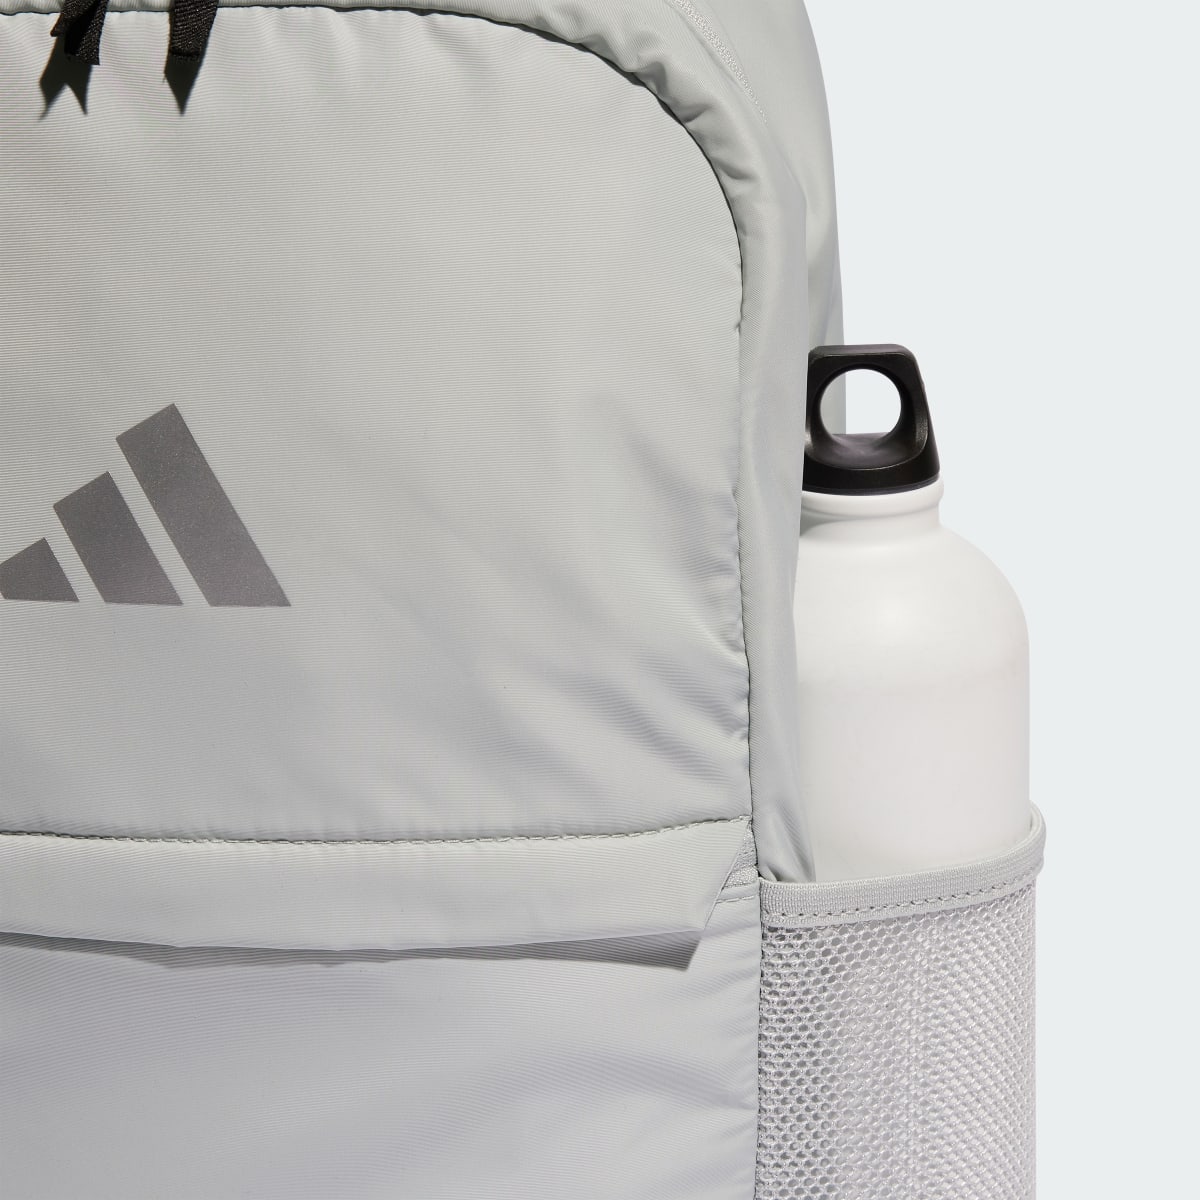 Adidas Sport Padded Backpack. 7